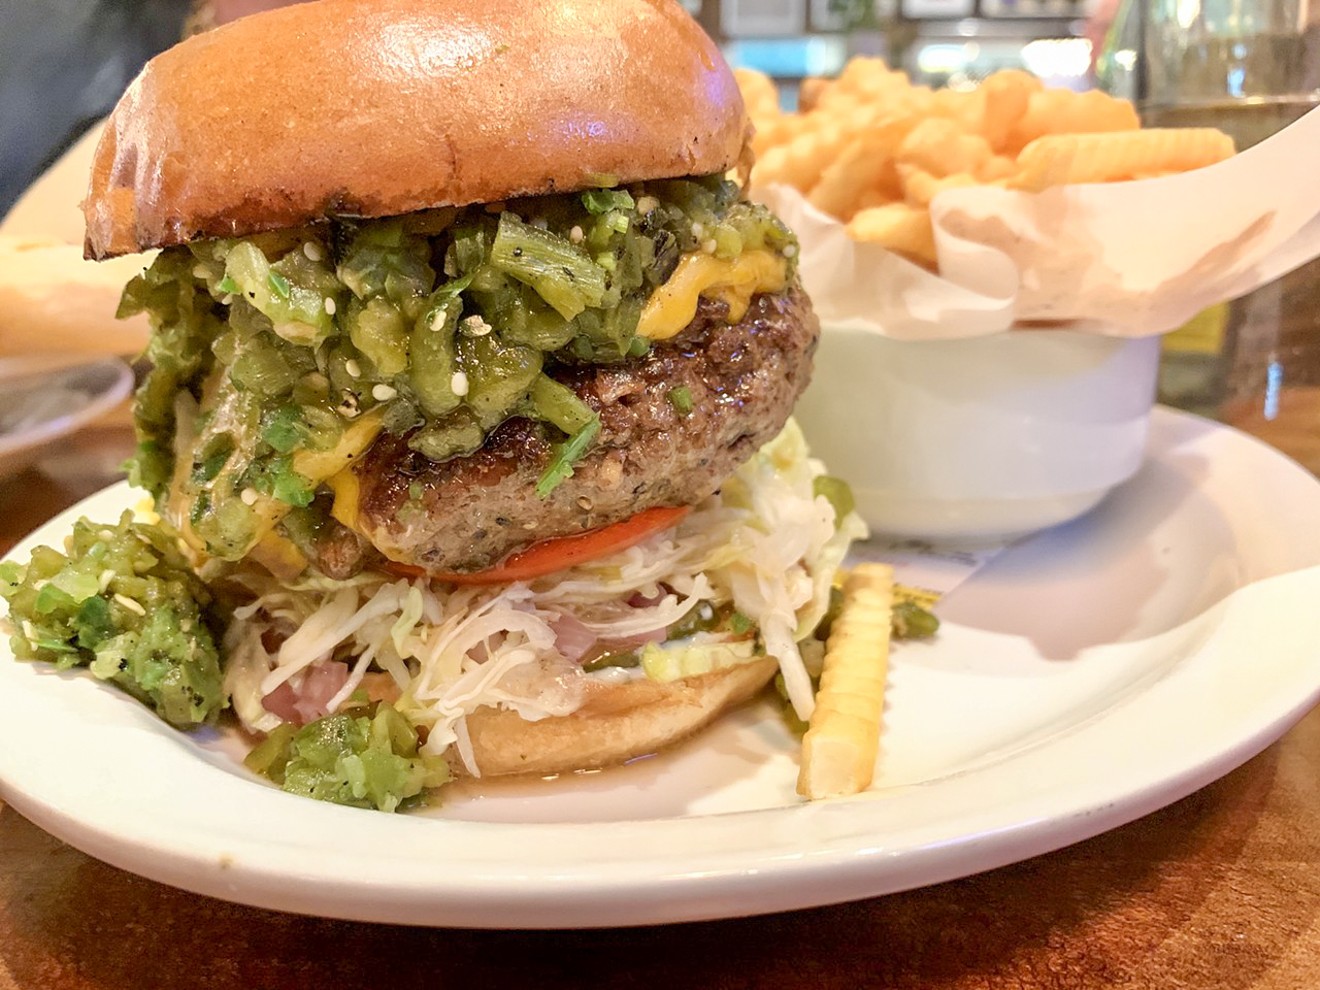 The cheeseburger at Desert Racer with added-on green chiles for $17 features a half-pound chuck and shoulder ground patty, shredded lettuce, onion and tomato.